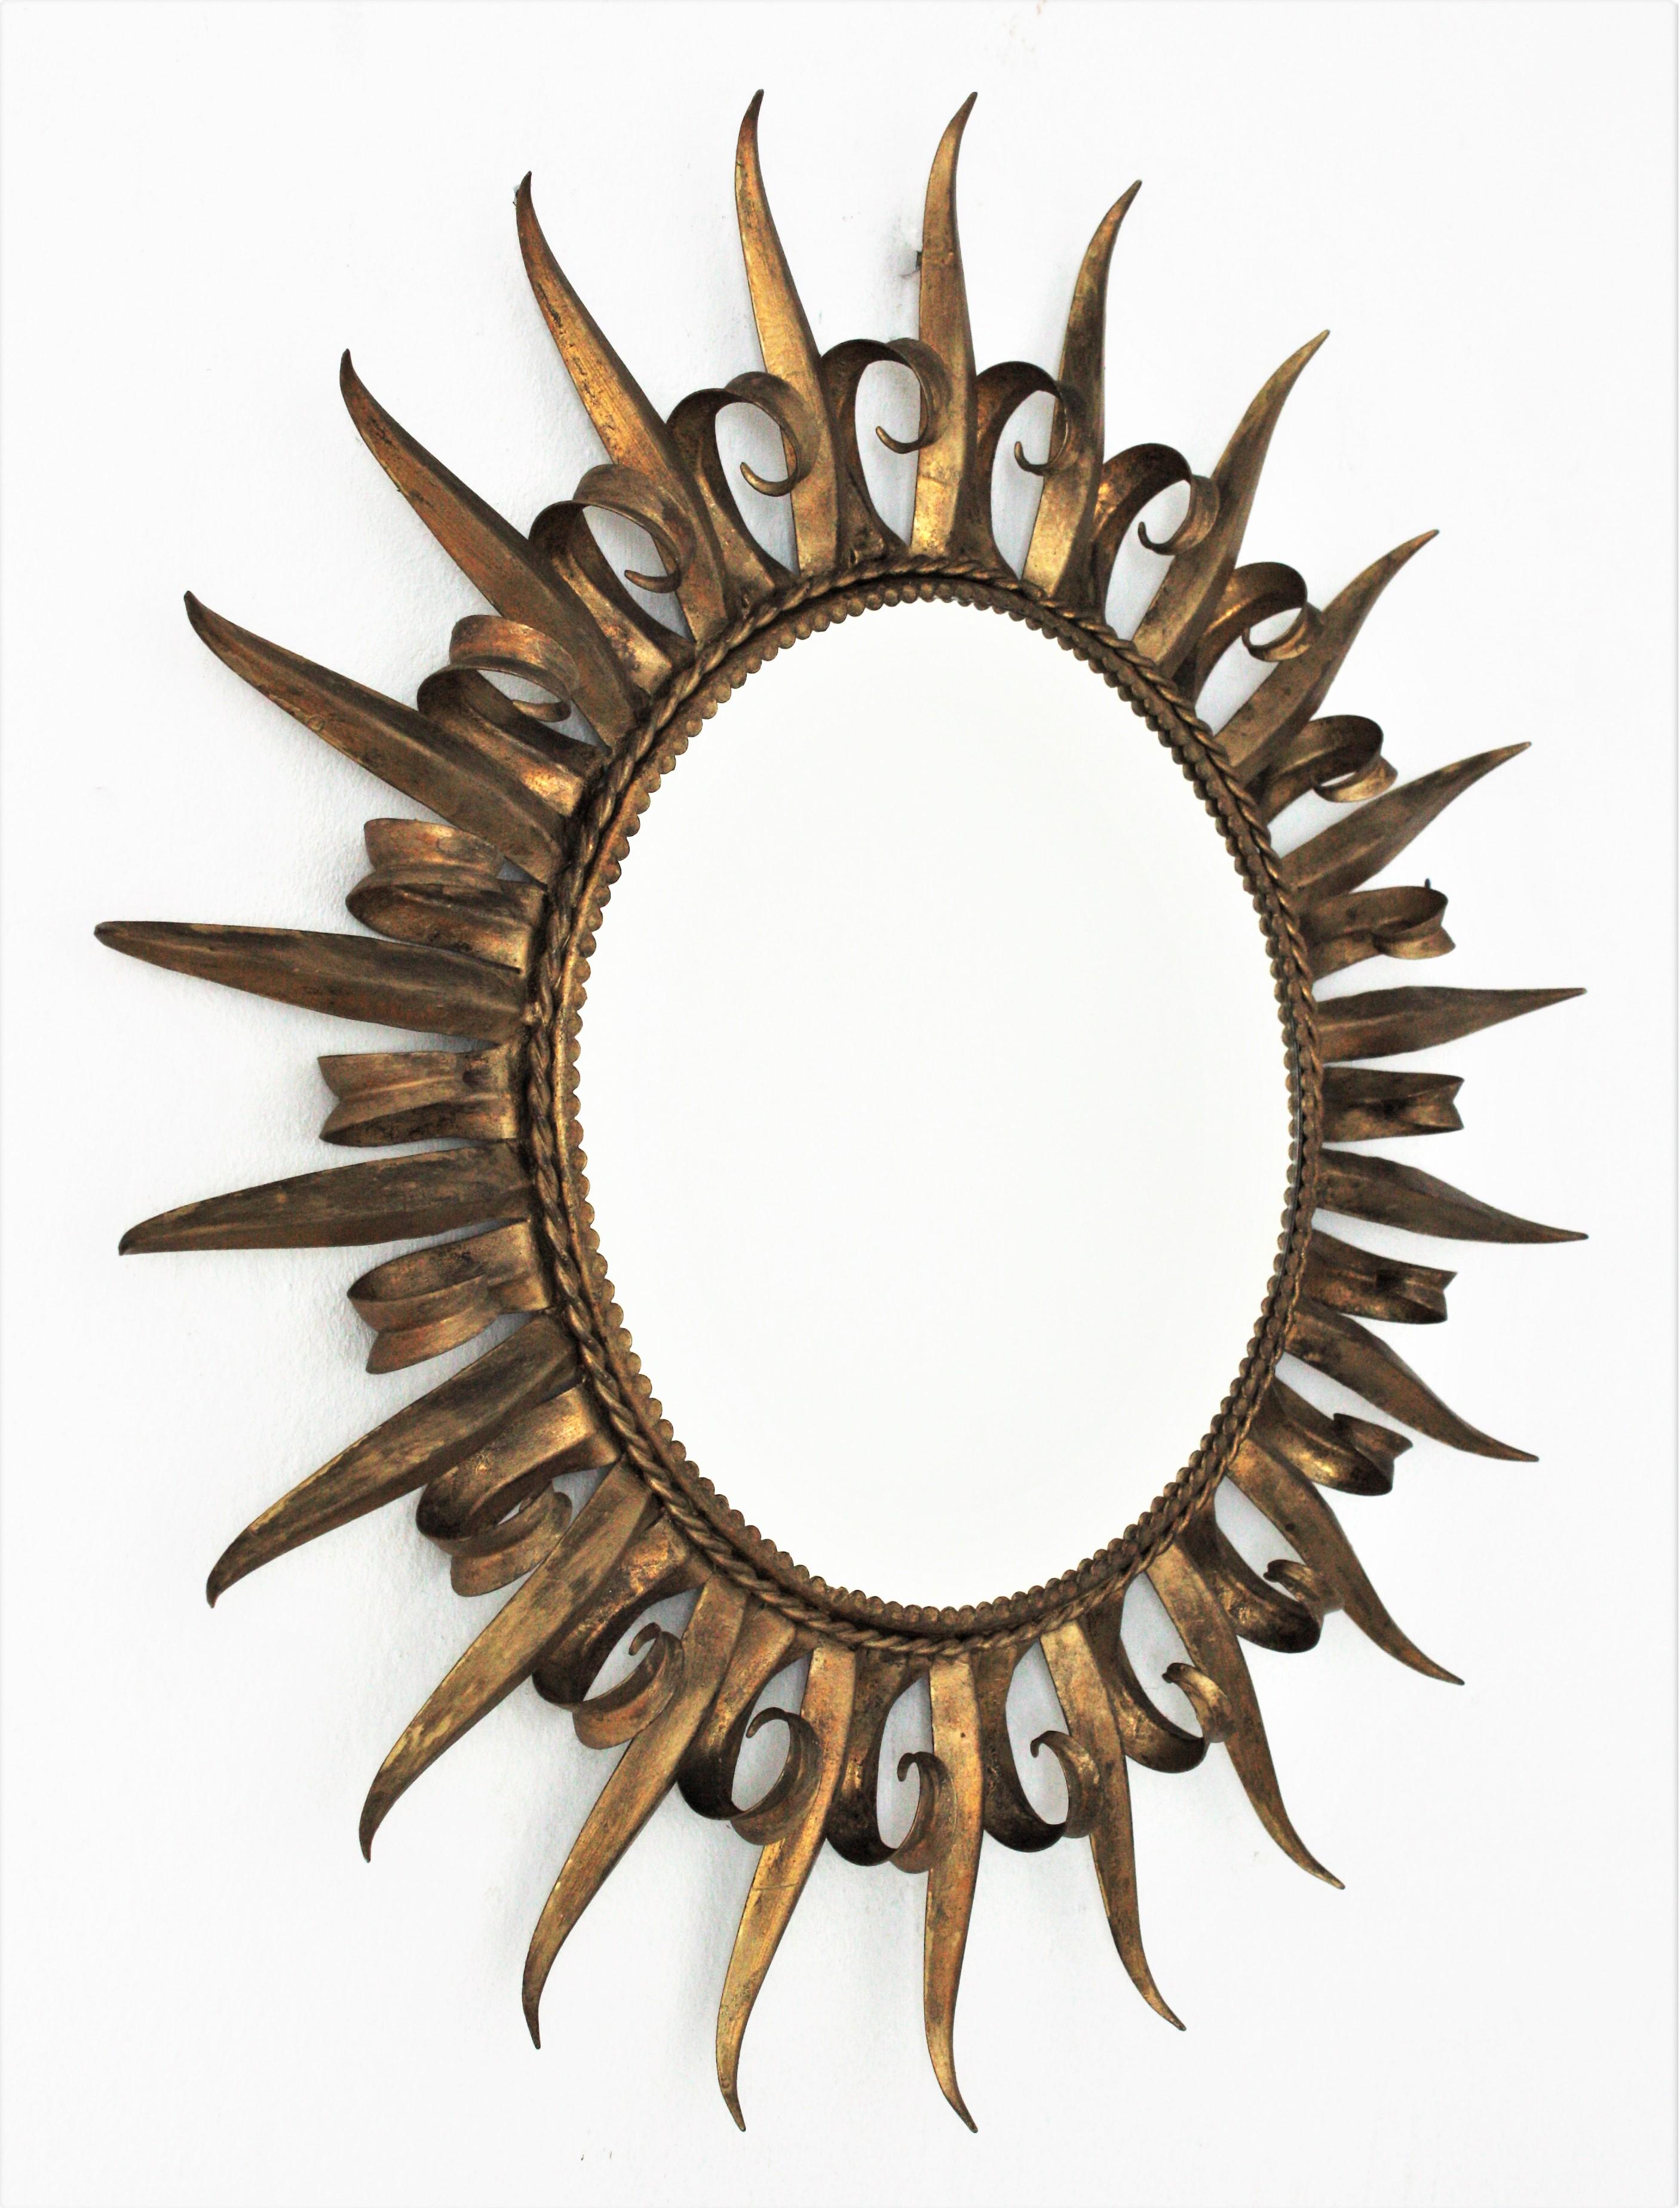 French gilt metal Brutalist eyelash circular mirror, circa 1950s.
Hand-hammered iron sunburst mirror with eyelash frame and a design combining midcentury and Brutalist accents. This wall mirror features an iron frame with alternating eyelash curved